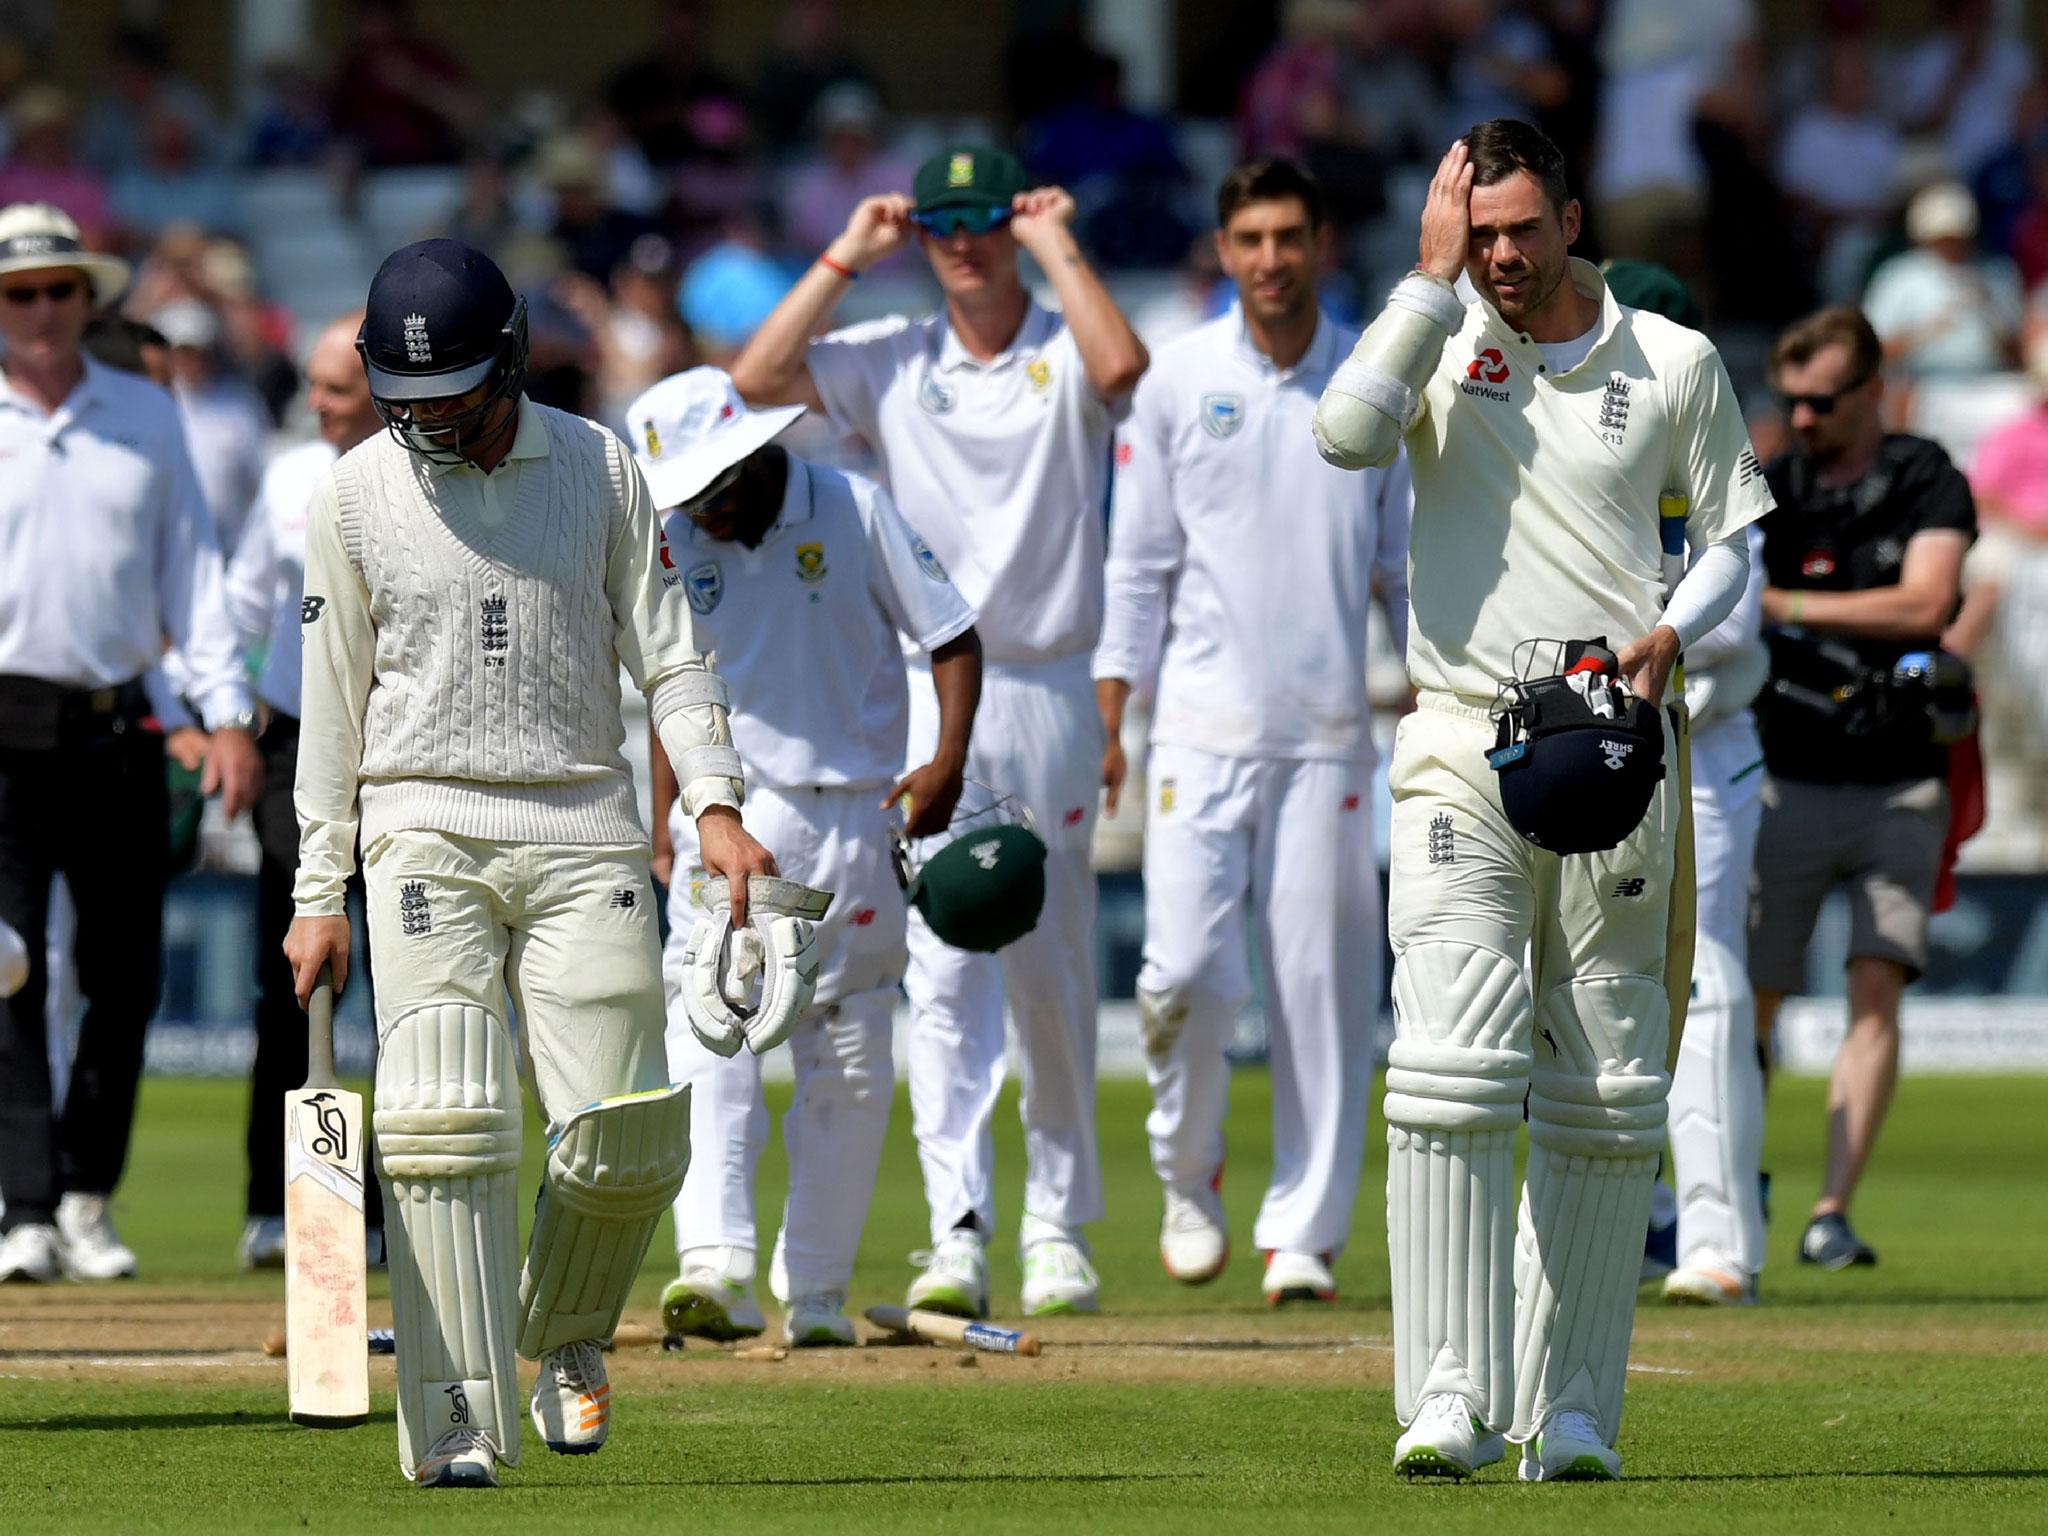 England were bowled out for 133 on the fourth and final day at Trent Bridge